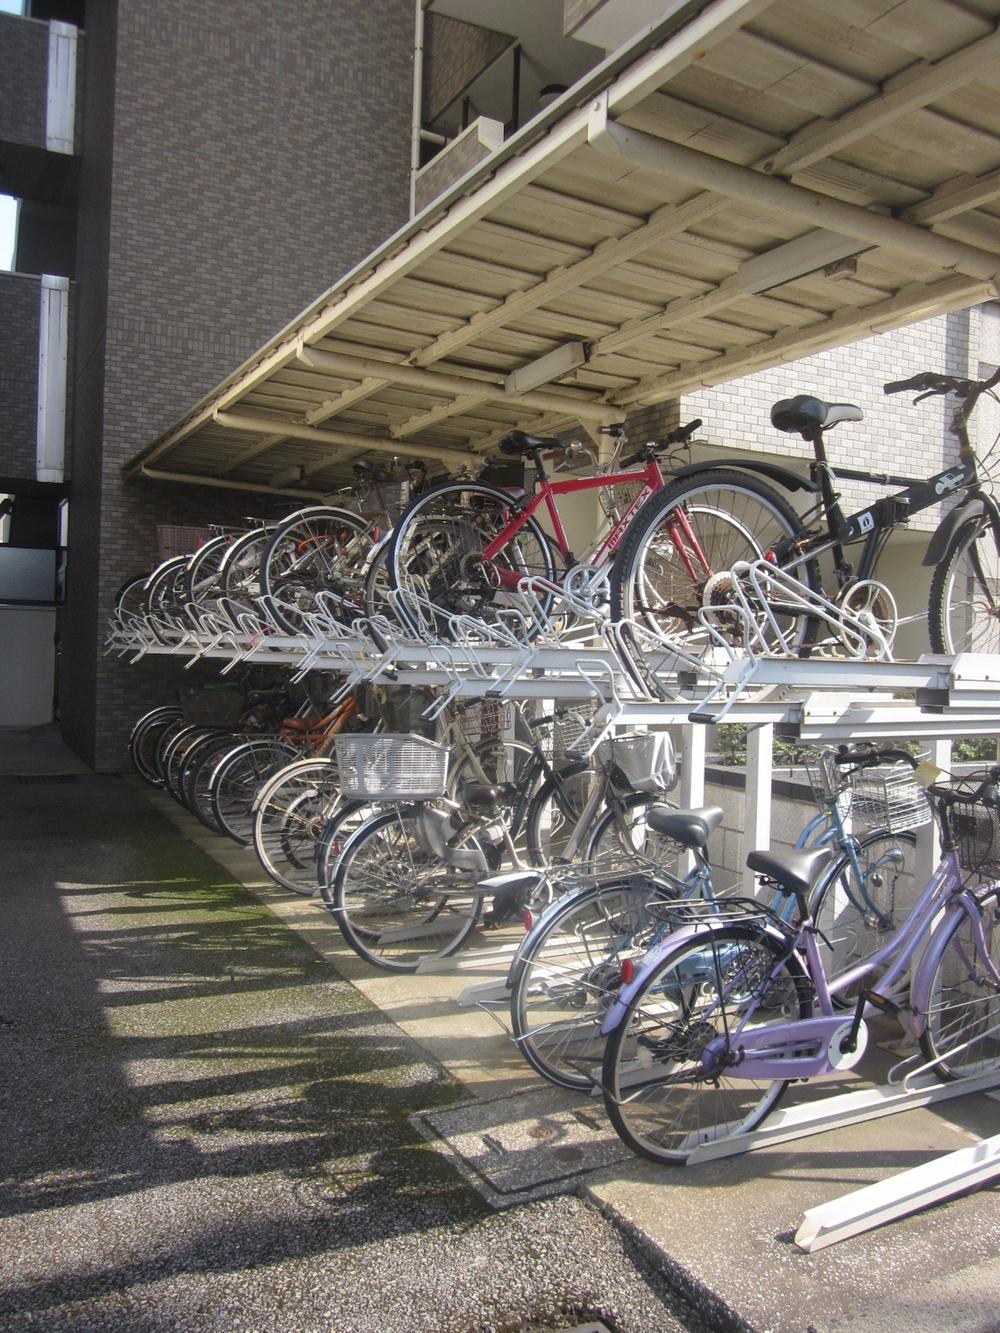 Other common areas. Place for storing bicycles / Common areas